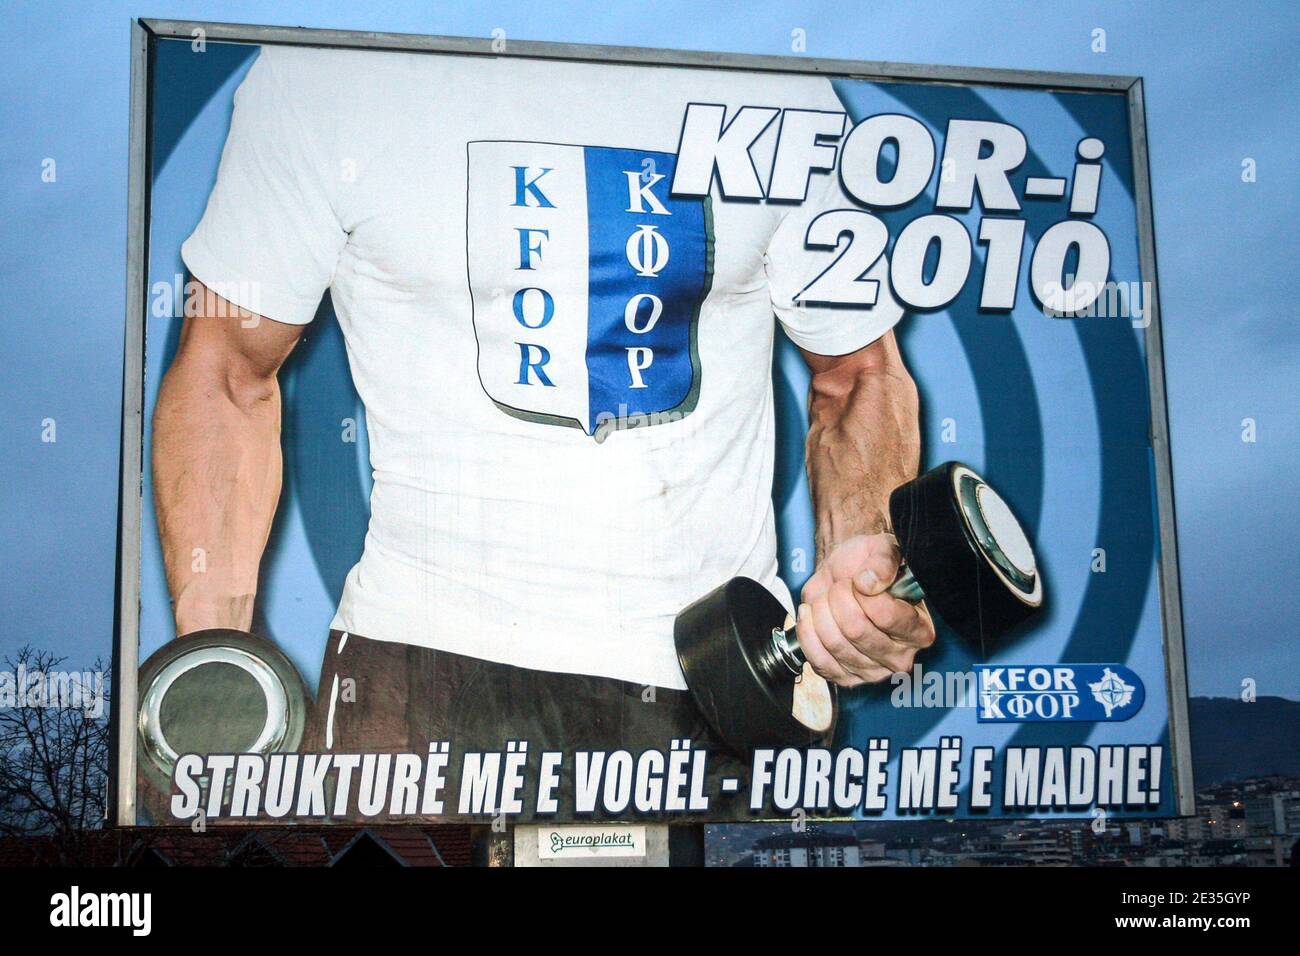 PRISHTINA, KOSOVO - JANUARY 10, 2010: poster of KFOR advetising for their structure and force for NYE 2010. KFOR is NATO military peace keeping operat Stock Photo